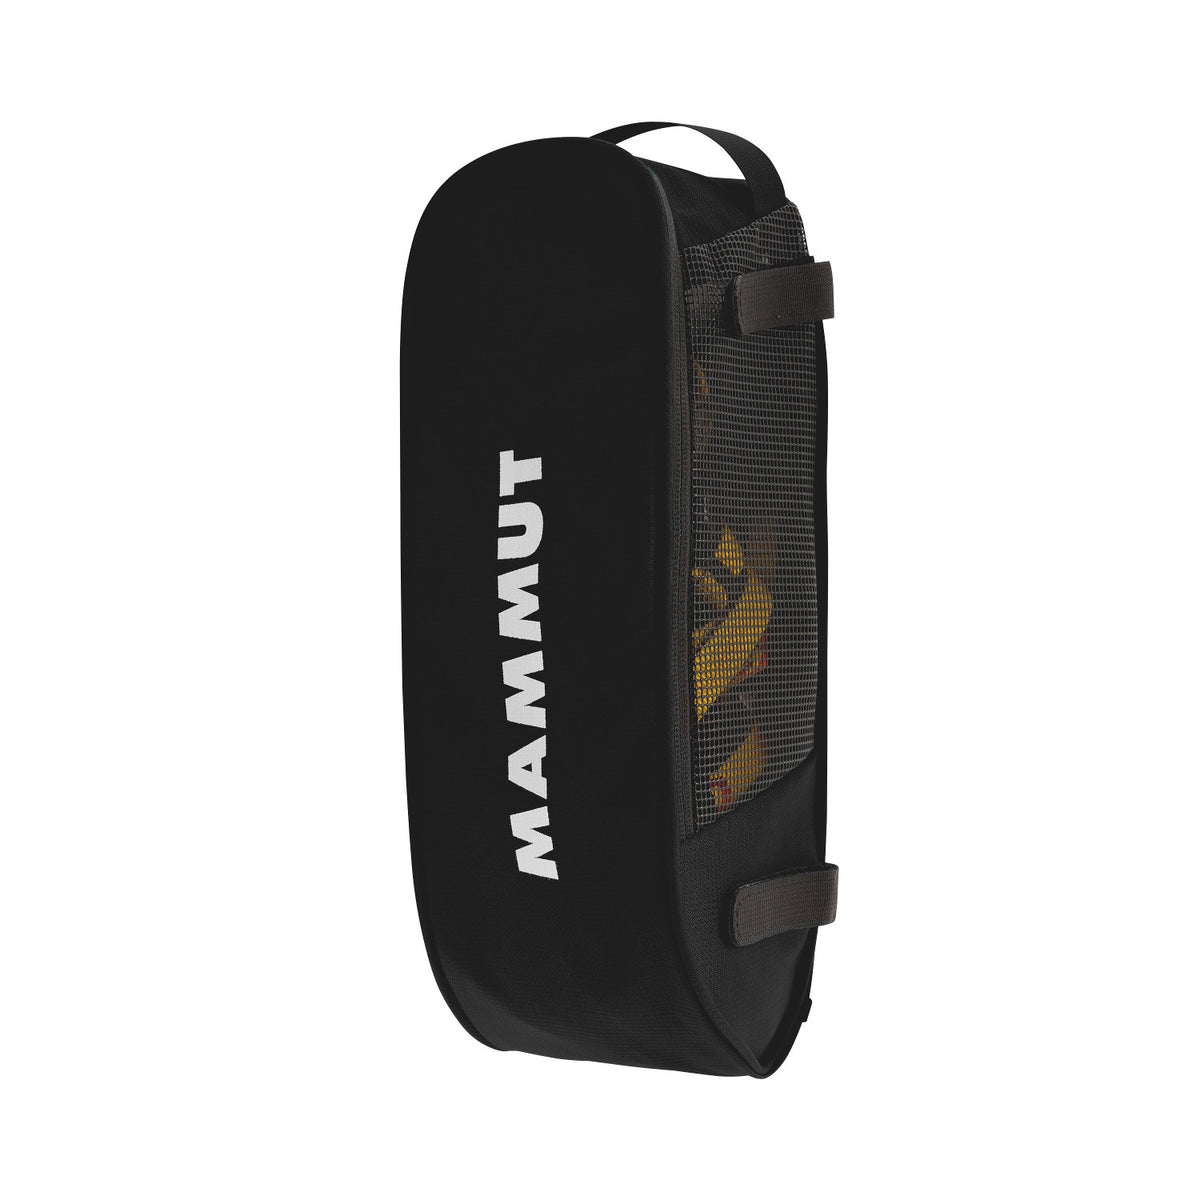 Mammut Crampon Pocket, front/side view shown in black colour